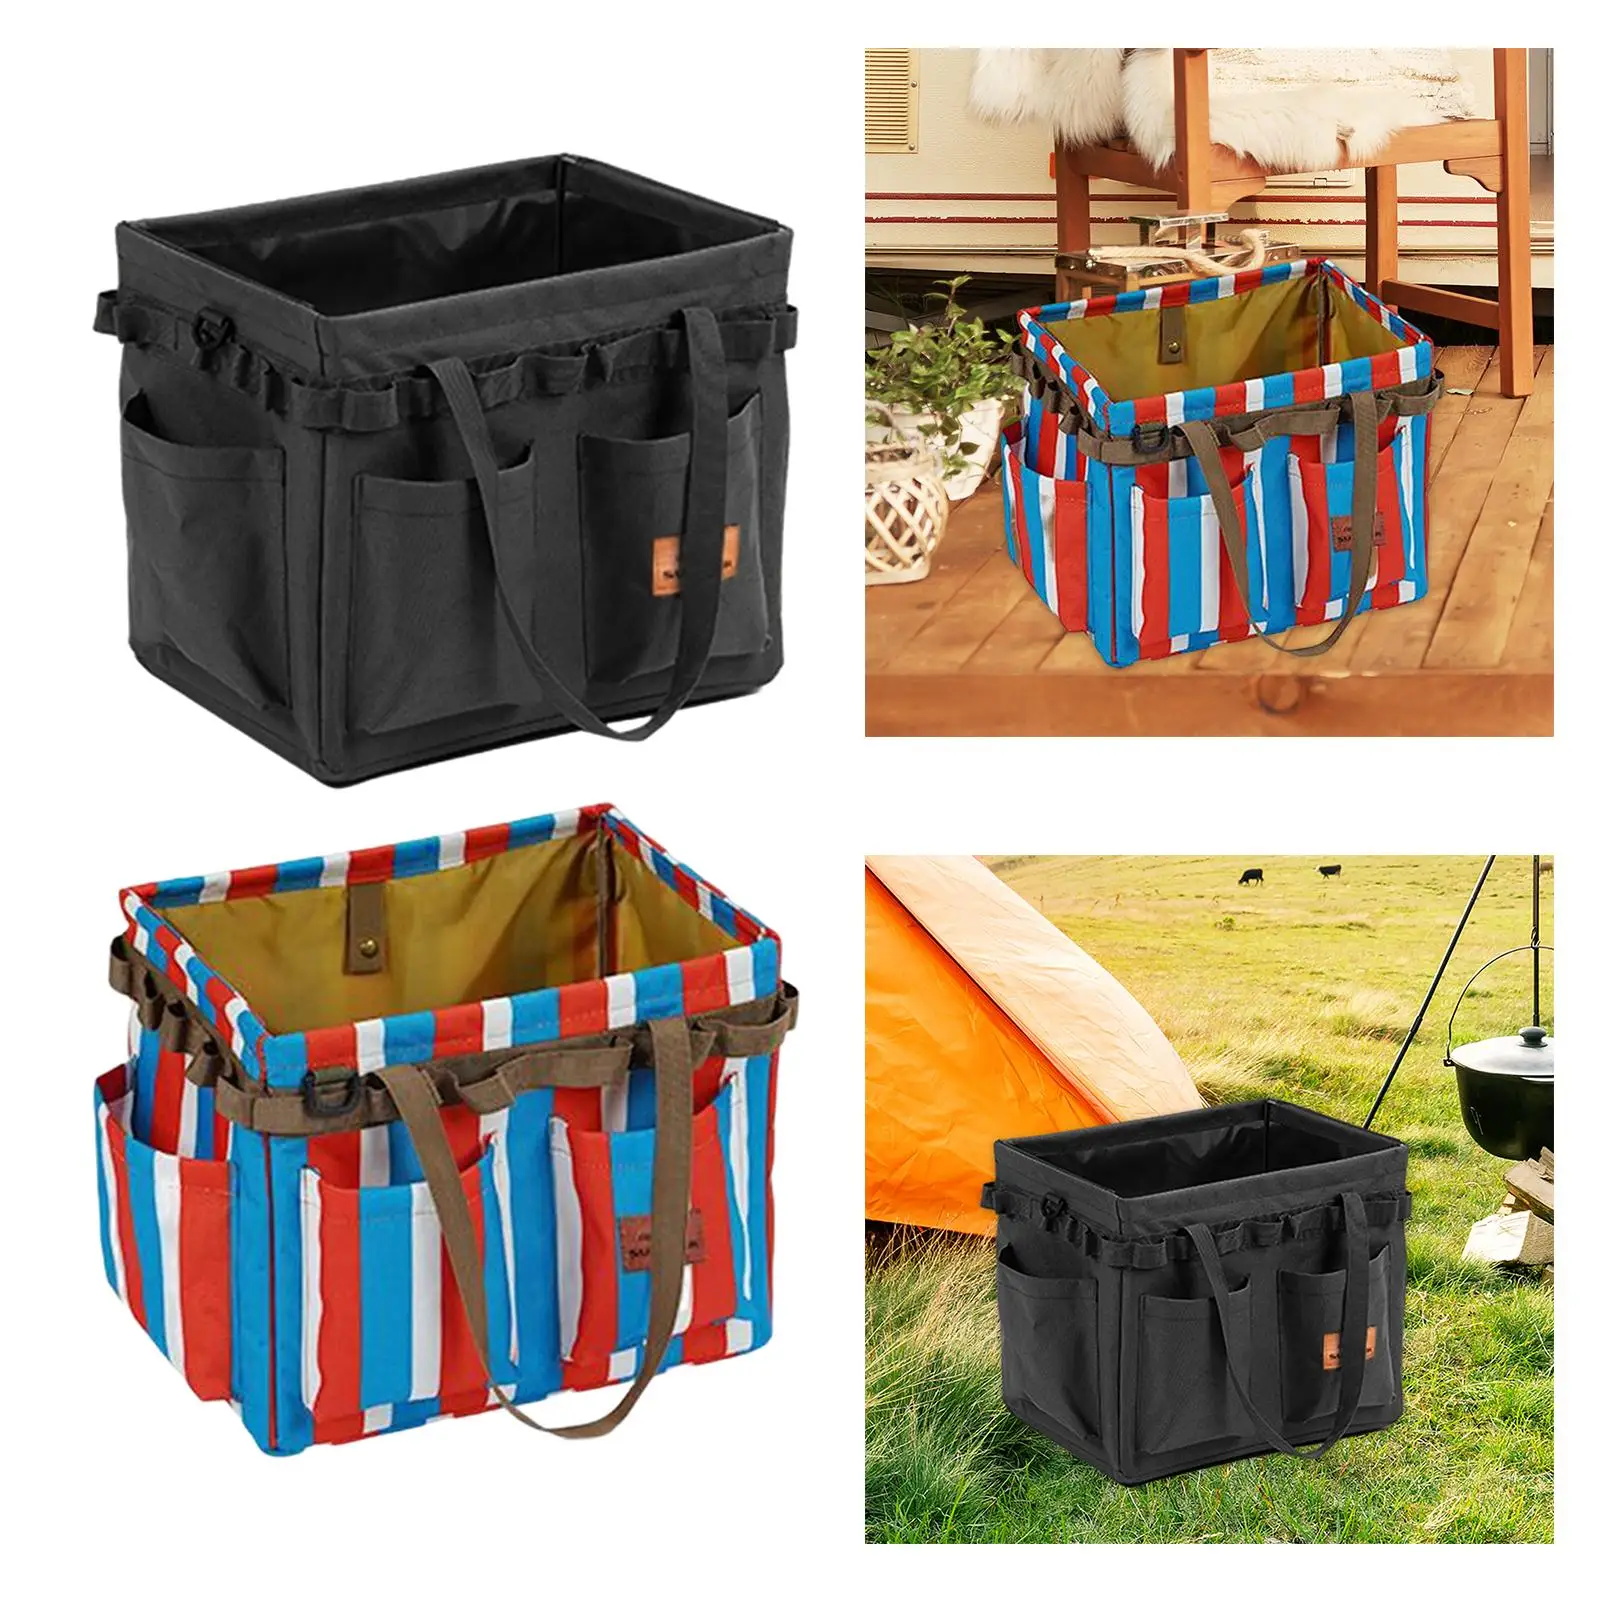 Reusable Utility Tote Tool Organizer Cooking Outdoor Camping Storage Bag